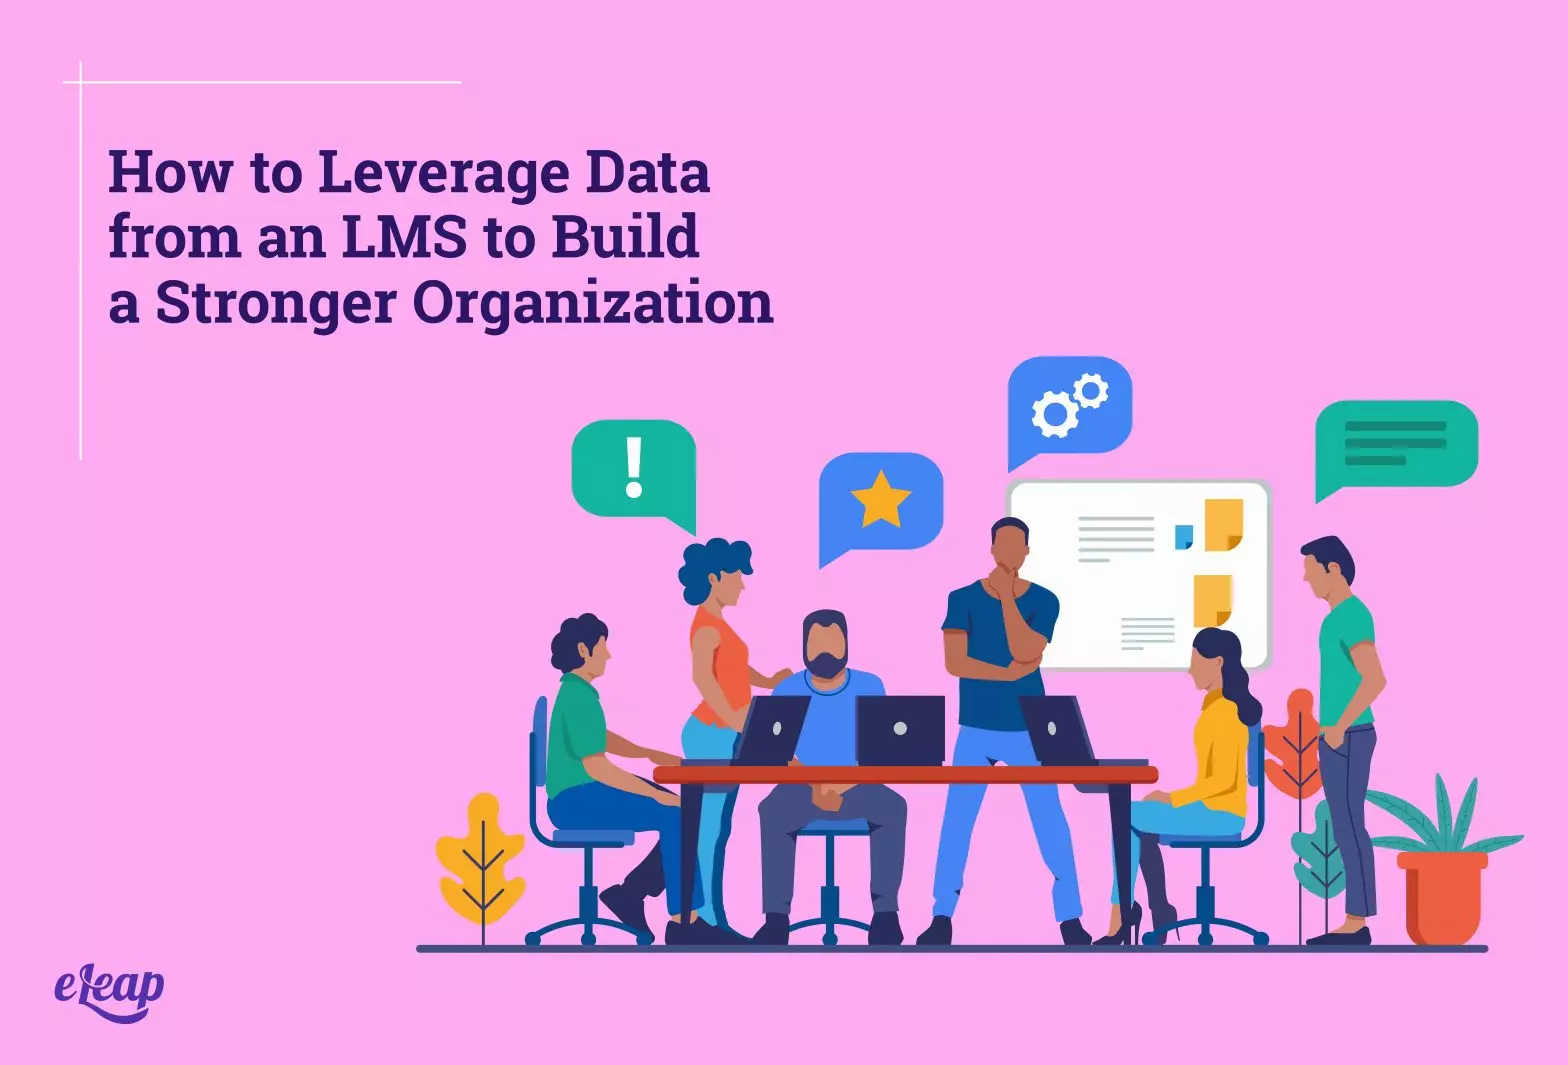 How to Leverage Data from an LMS to Build a Stronger Organization